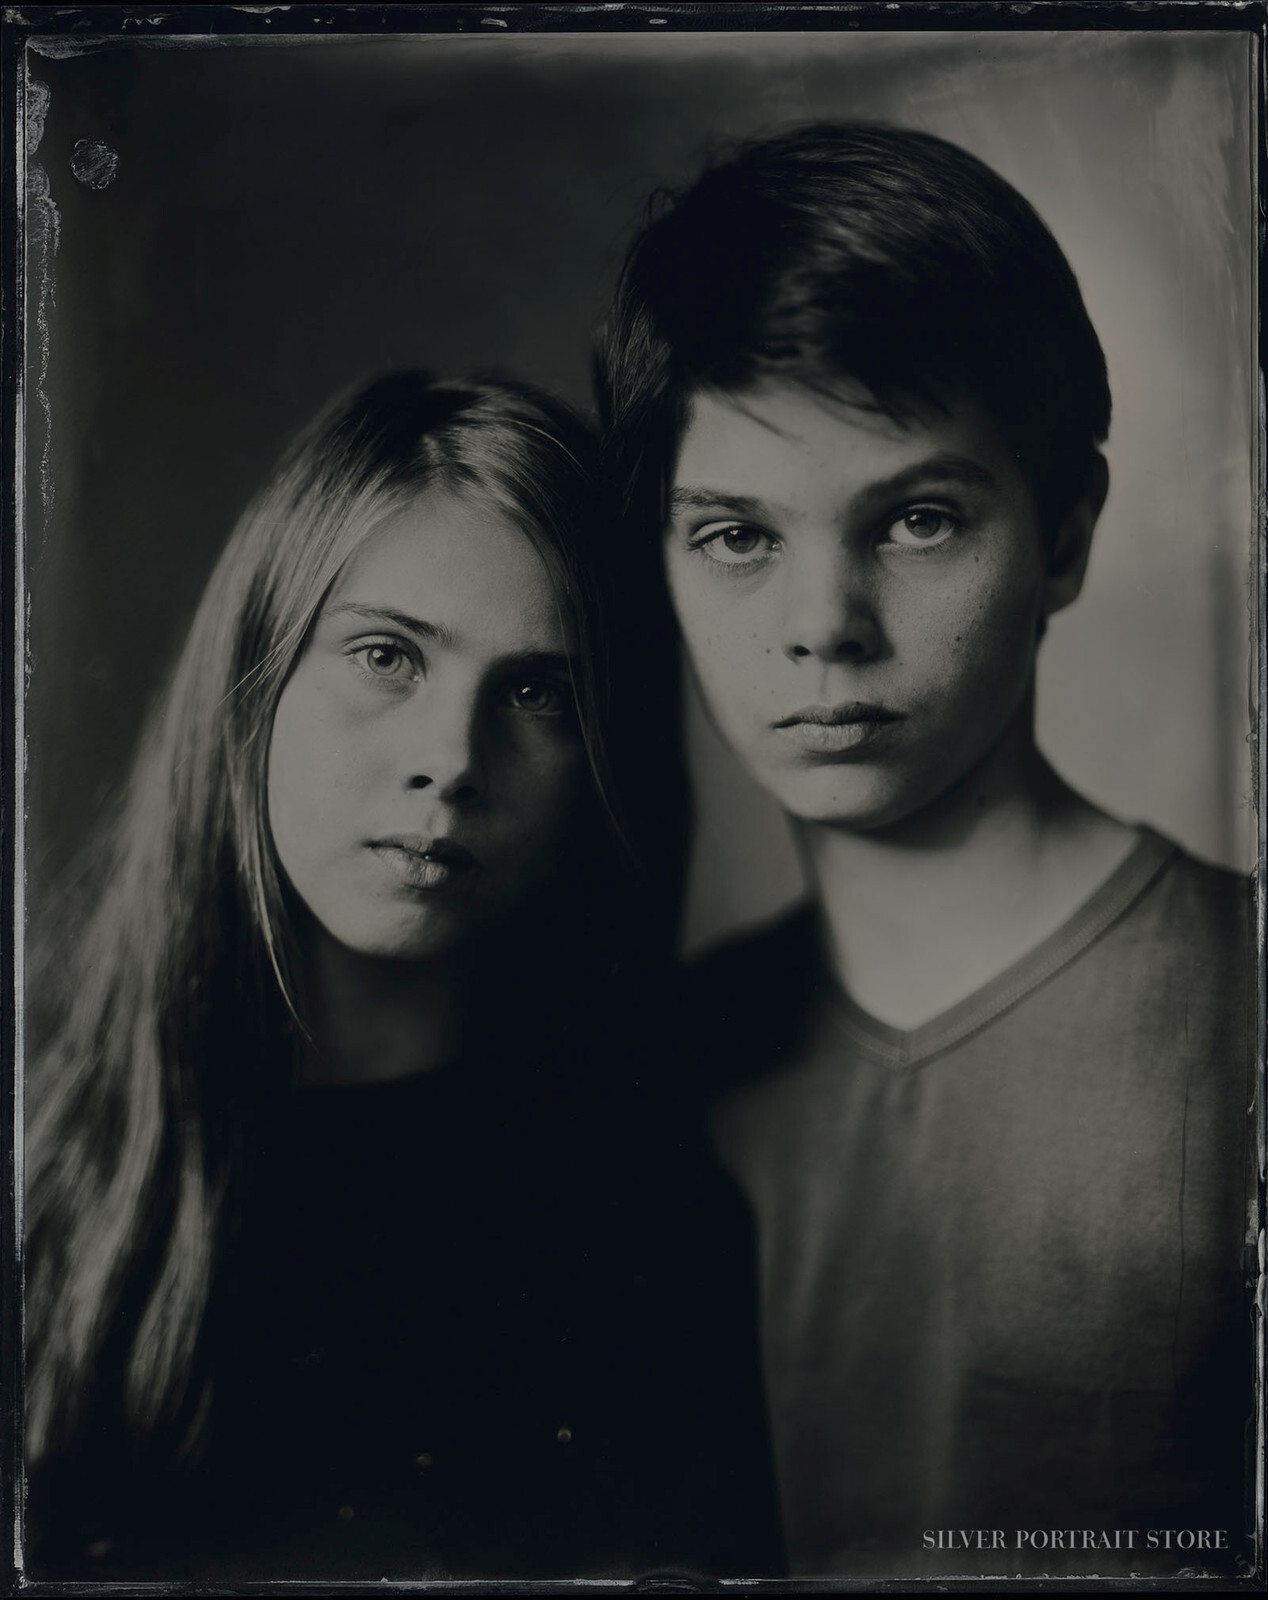 Amelie & Gilbert-Silver Portrait Store-Scan from Wet plate collodion-Tintype 20 x 25 cm